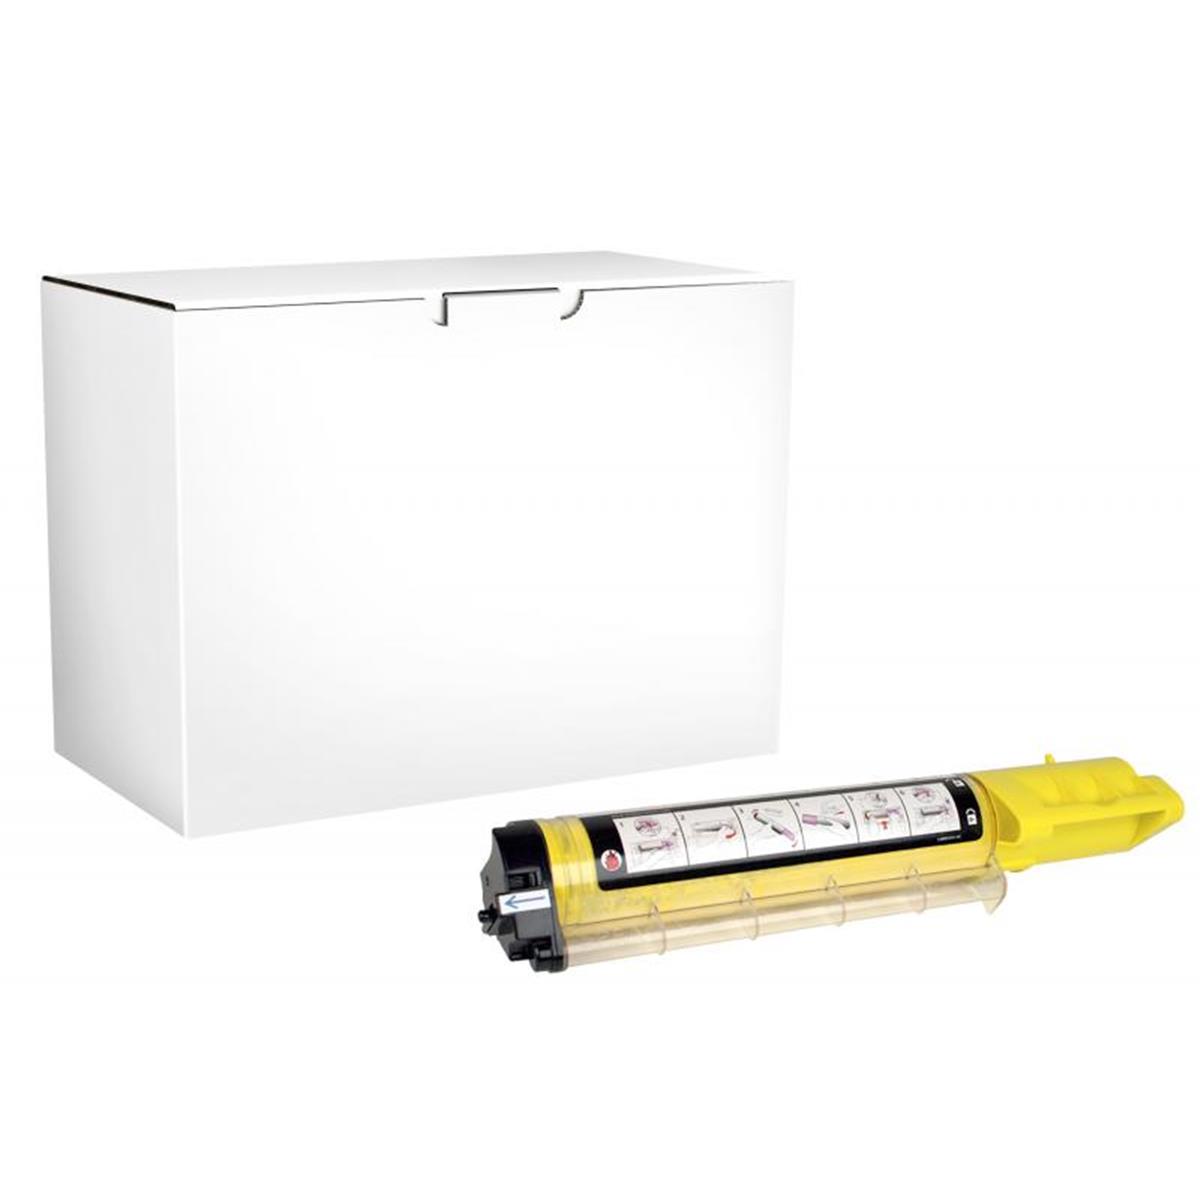 Picture of Dell 200108 High Yield Yellow Toner Cartridge for Dell 3010